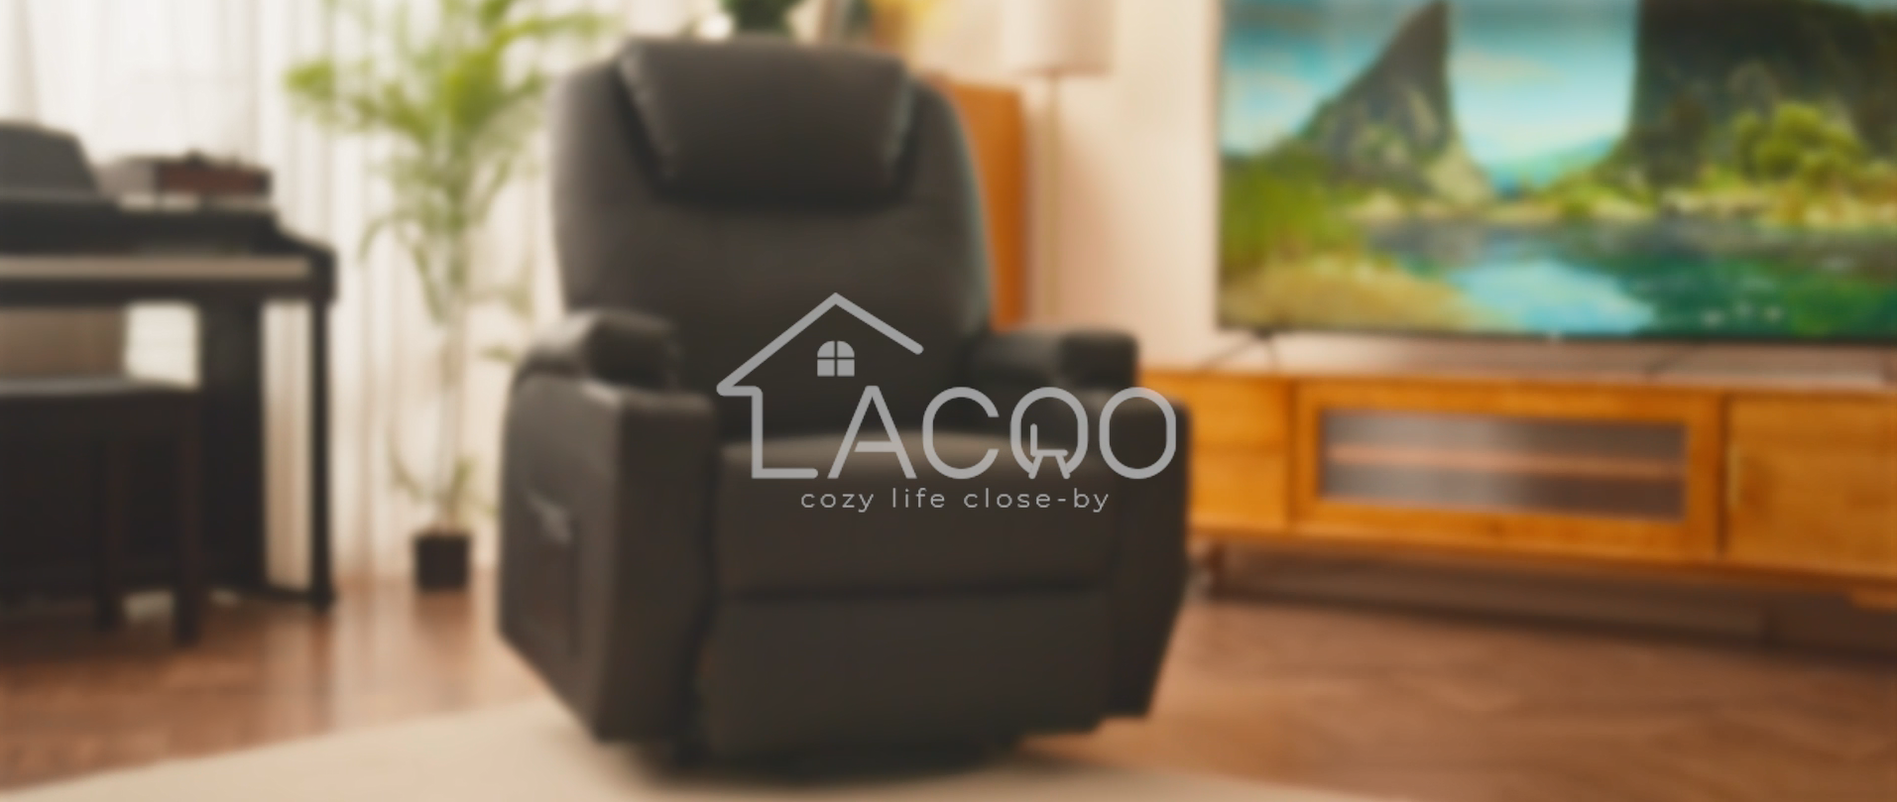 Lacoo Power Lift Recliner with Massage and Heat, Black Faux Leather - image 2 of 8